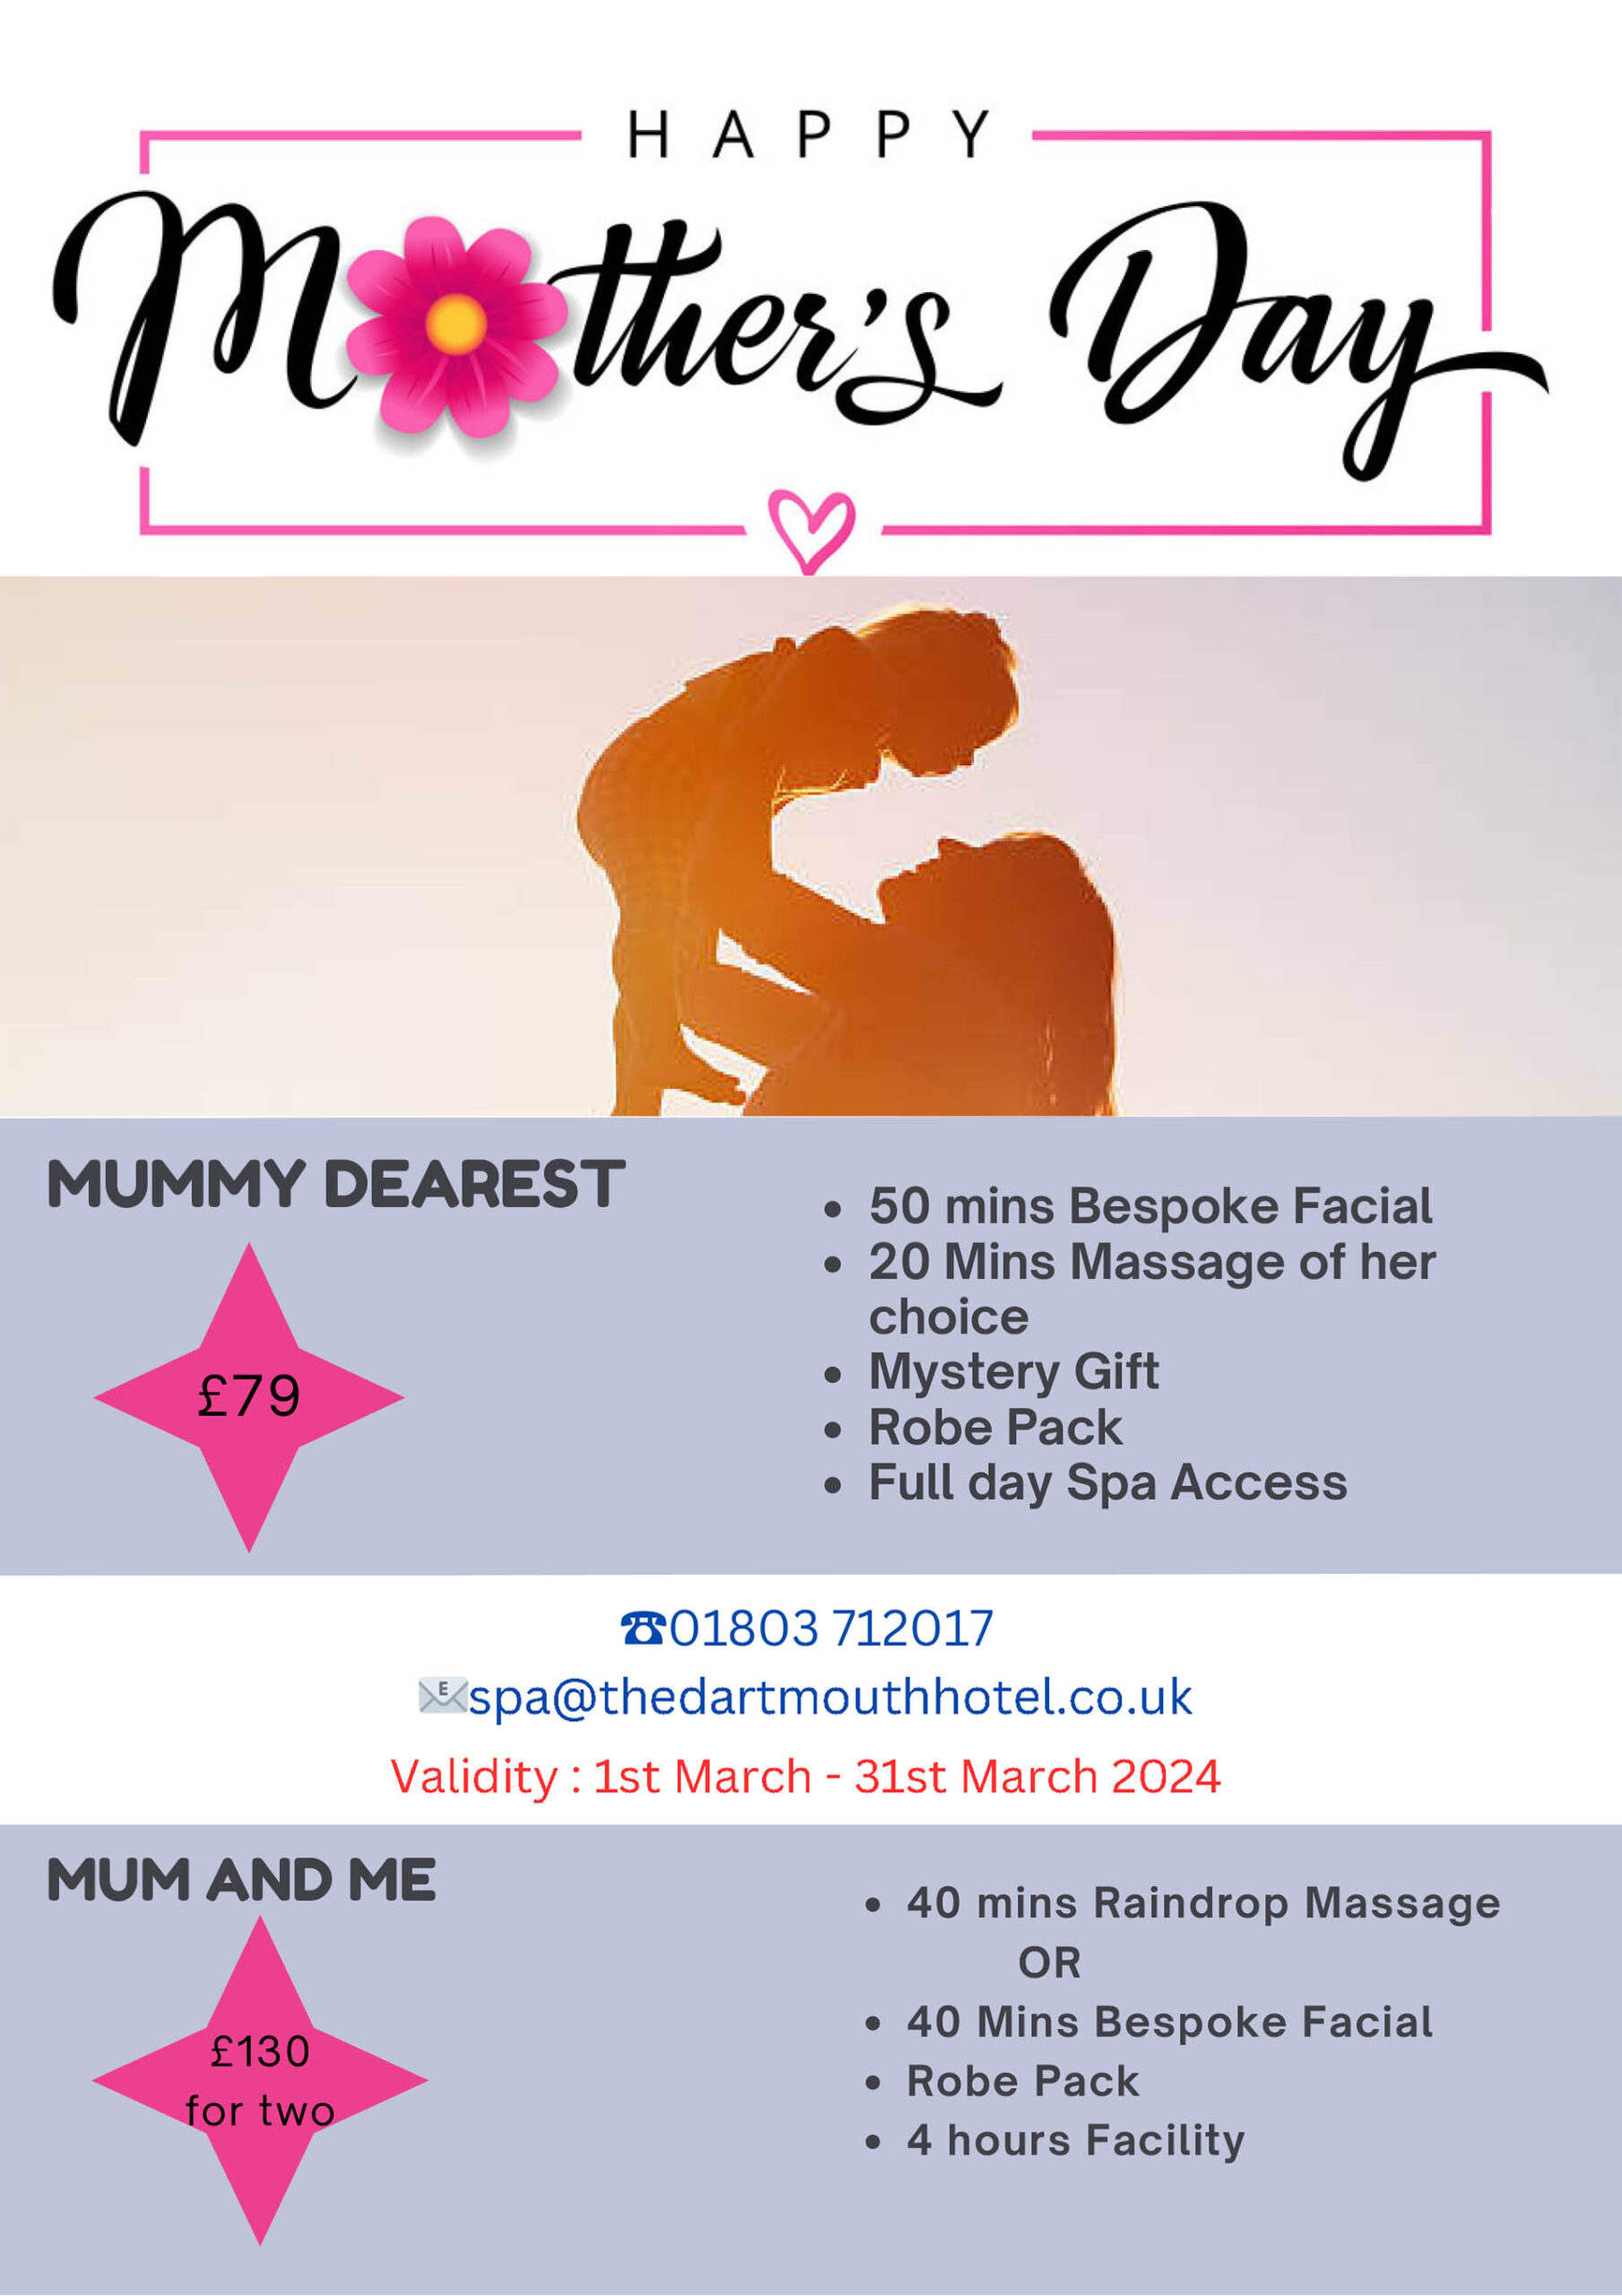 The Dartmouth Hotel Golf & Spa Mother's Day Special